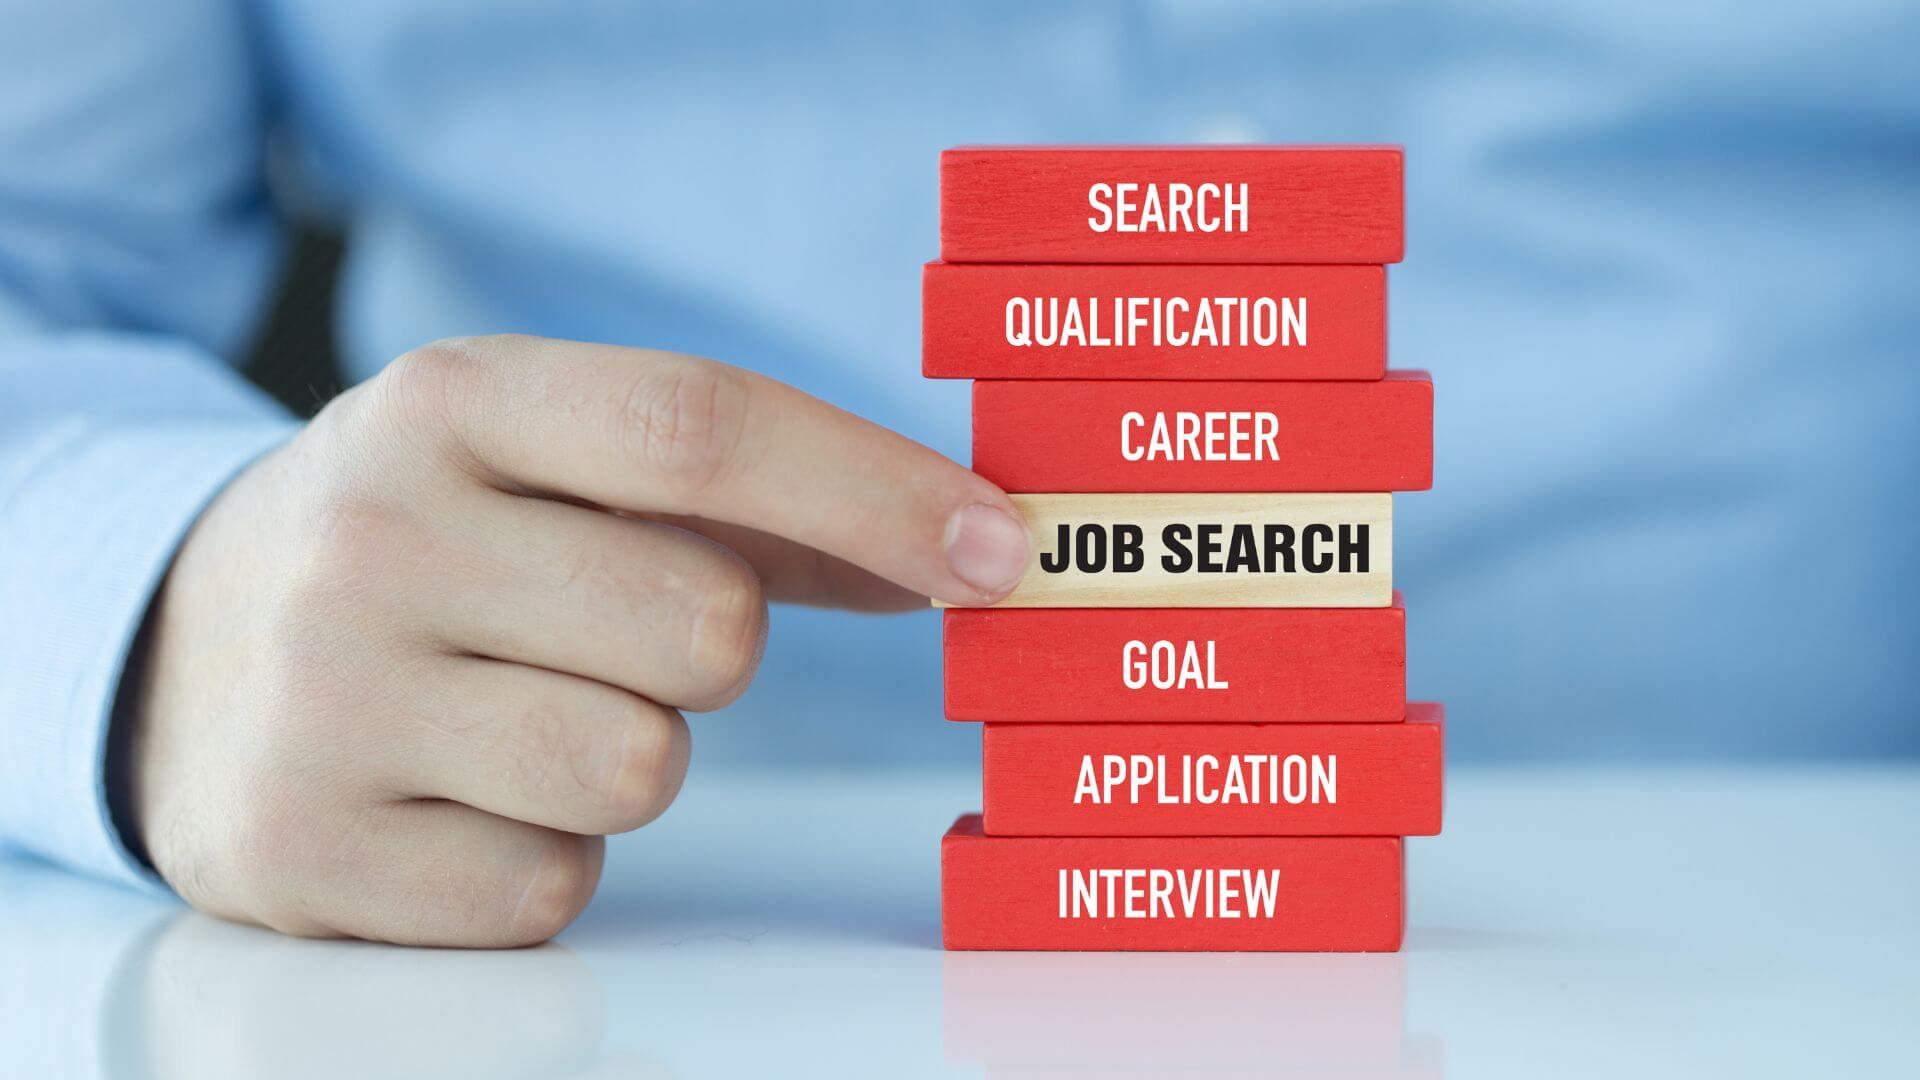 How to Develop a Job Search Strategy That Works